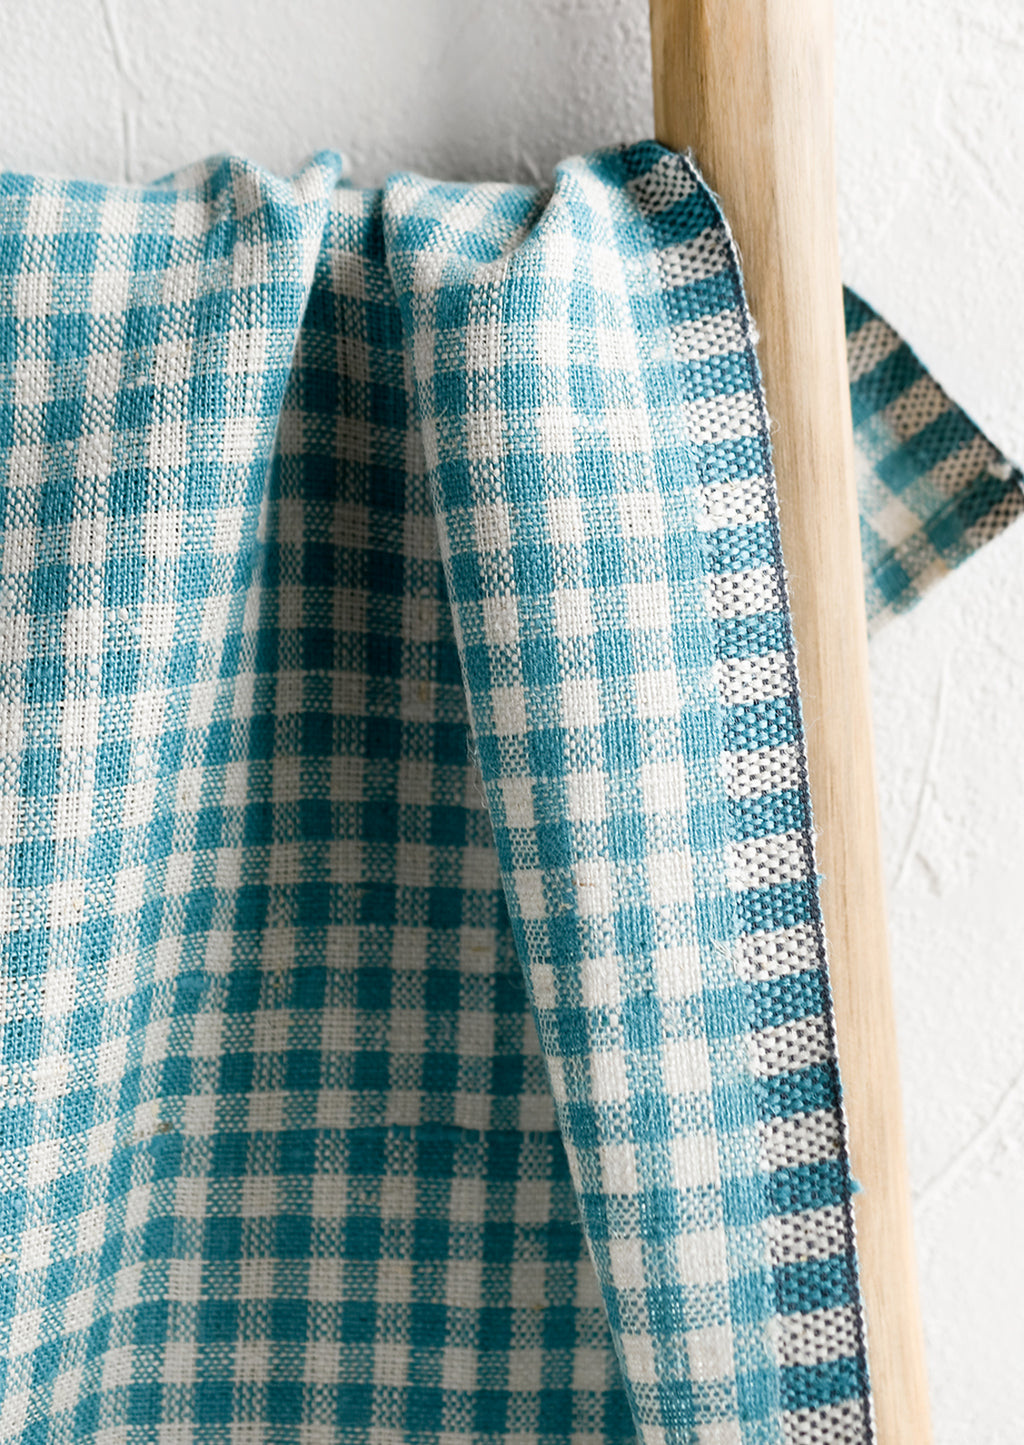 Picnic Blue: A woven gingham linen tea towel in blue turquoise color.